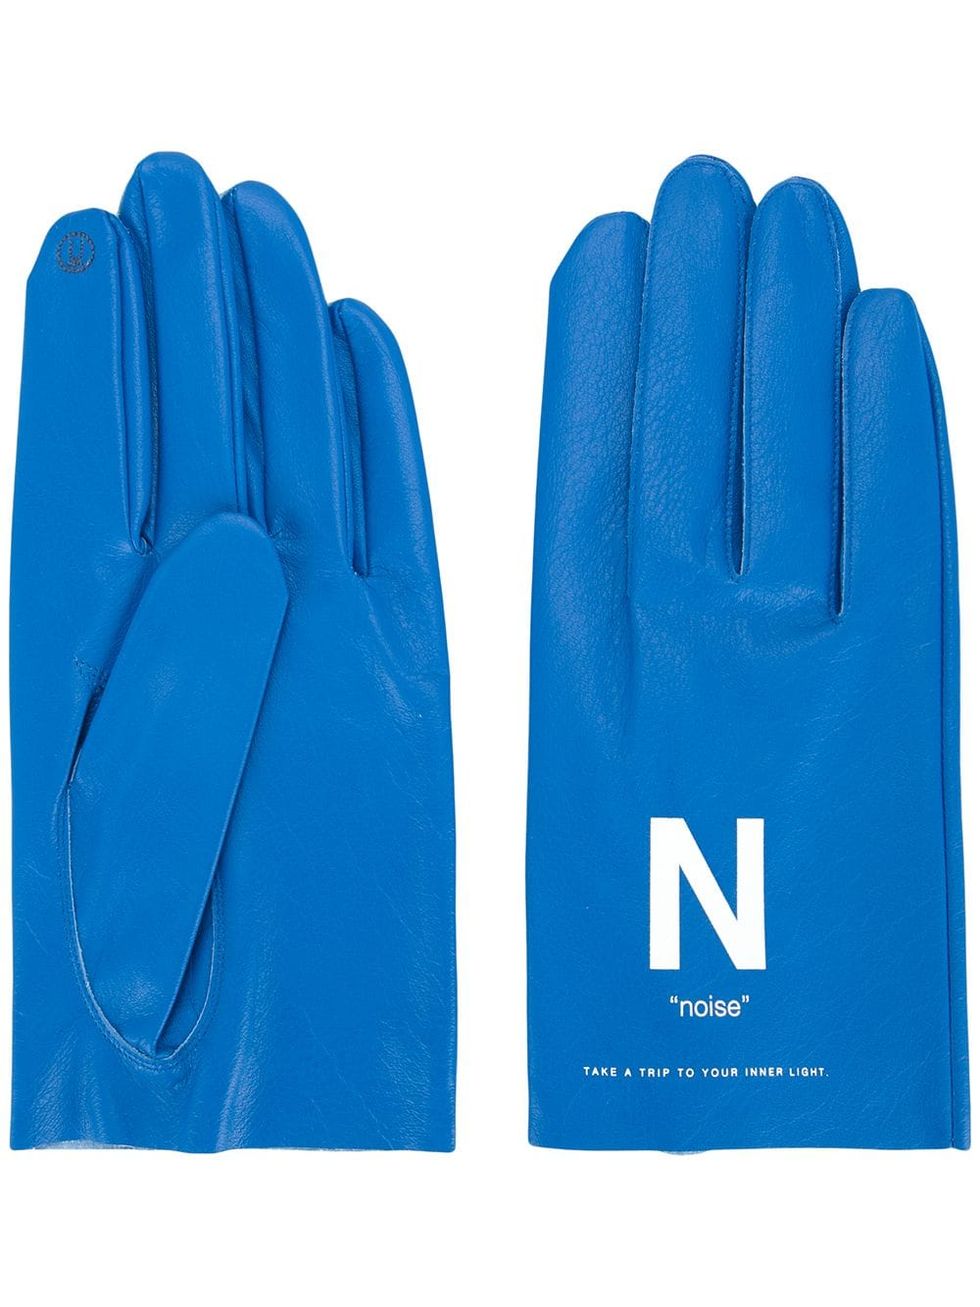 Glove, Safety glove, Personal protective equipment, Sports gear, Cobalt blue, Blue, Electric blue, Fashion accessory, Bicycle clothing, Bicycle glove, 